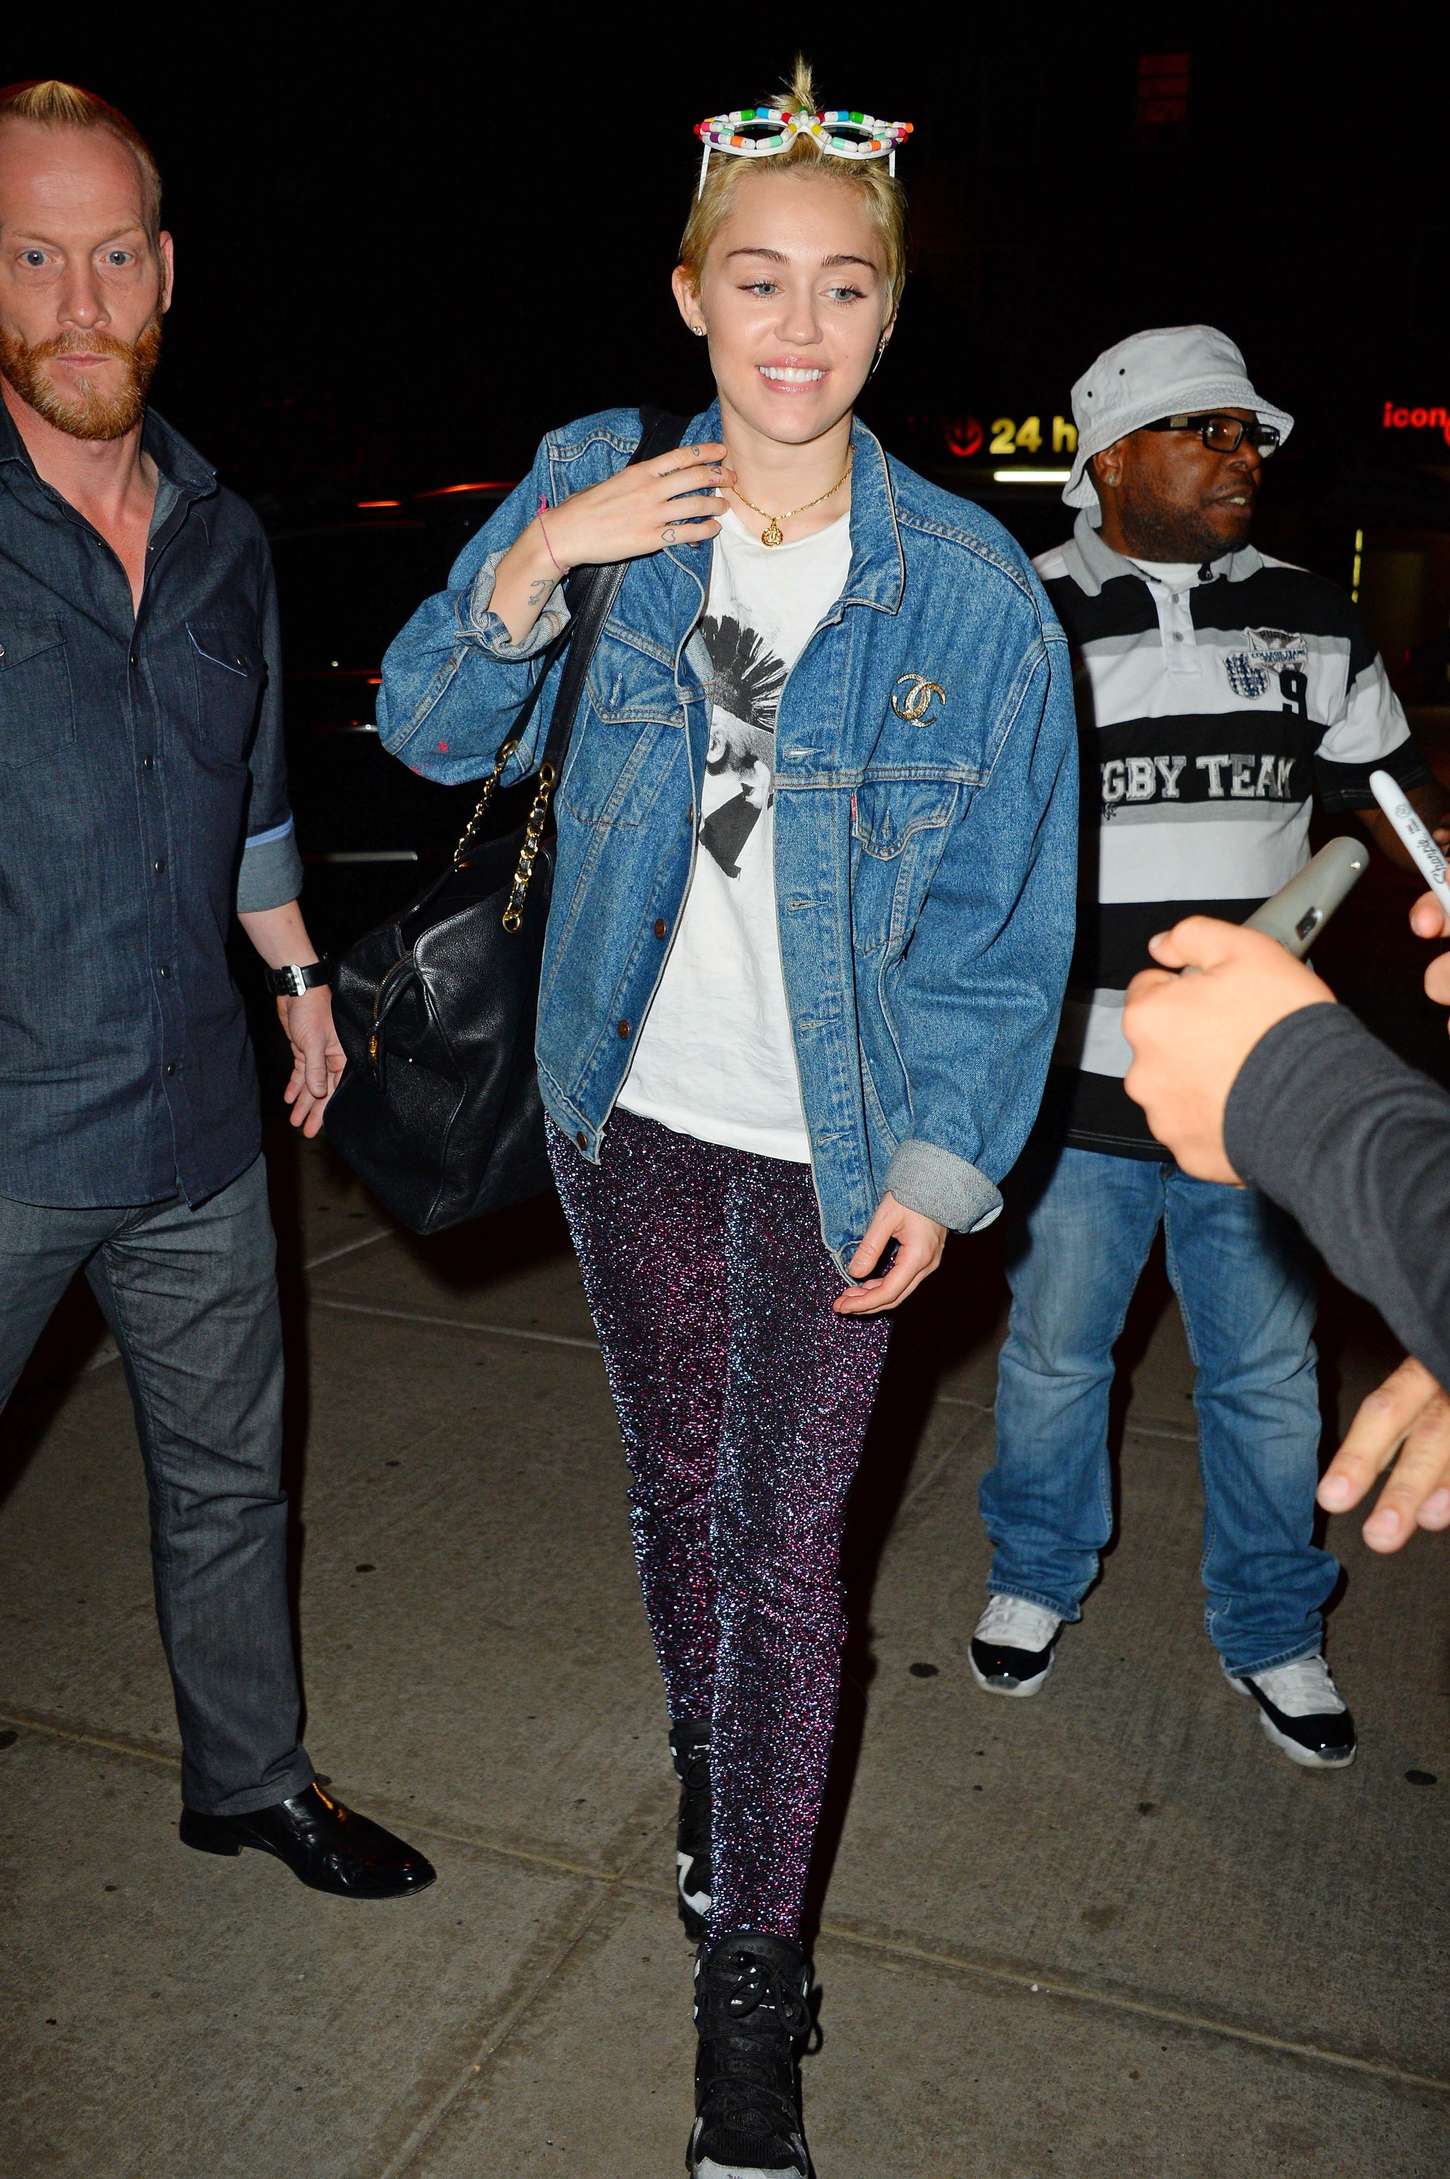 Miley Cyrus Emerges Radiant from New York Photo Studio, Teasing ...